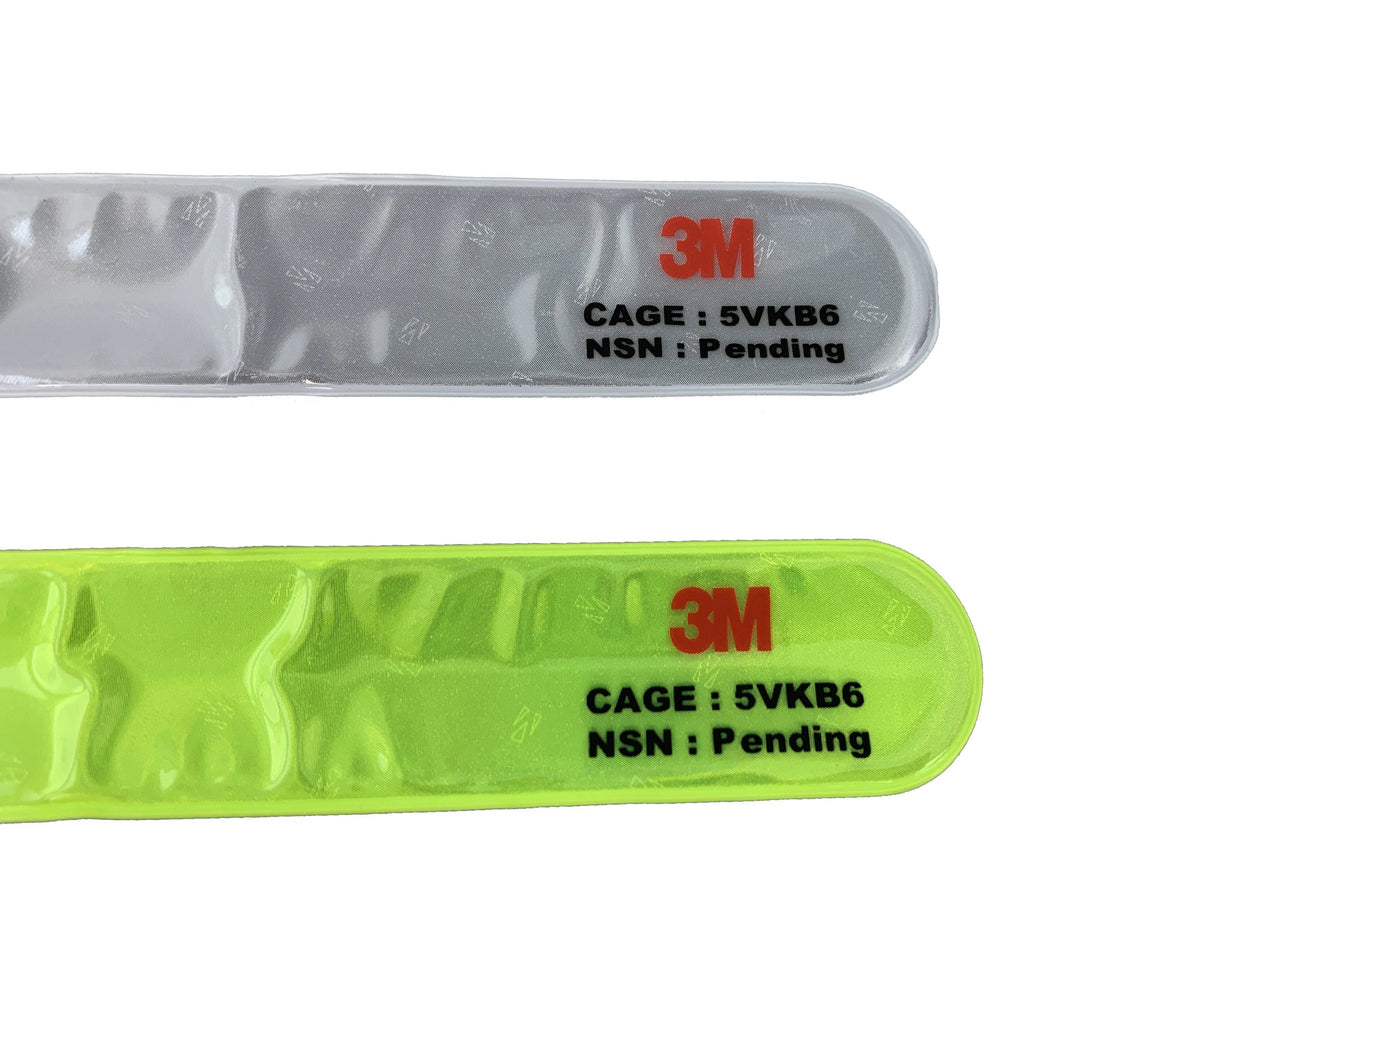 Instant Self Molding Safety Band - 3M Strap - Extremely Reflective (2 Pack) Countycomm